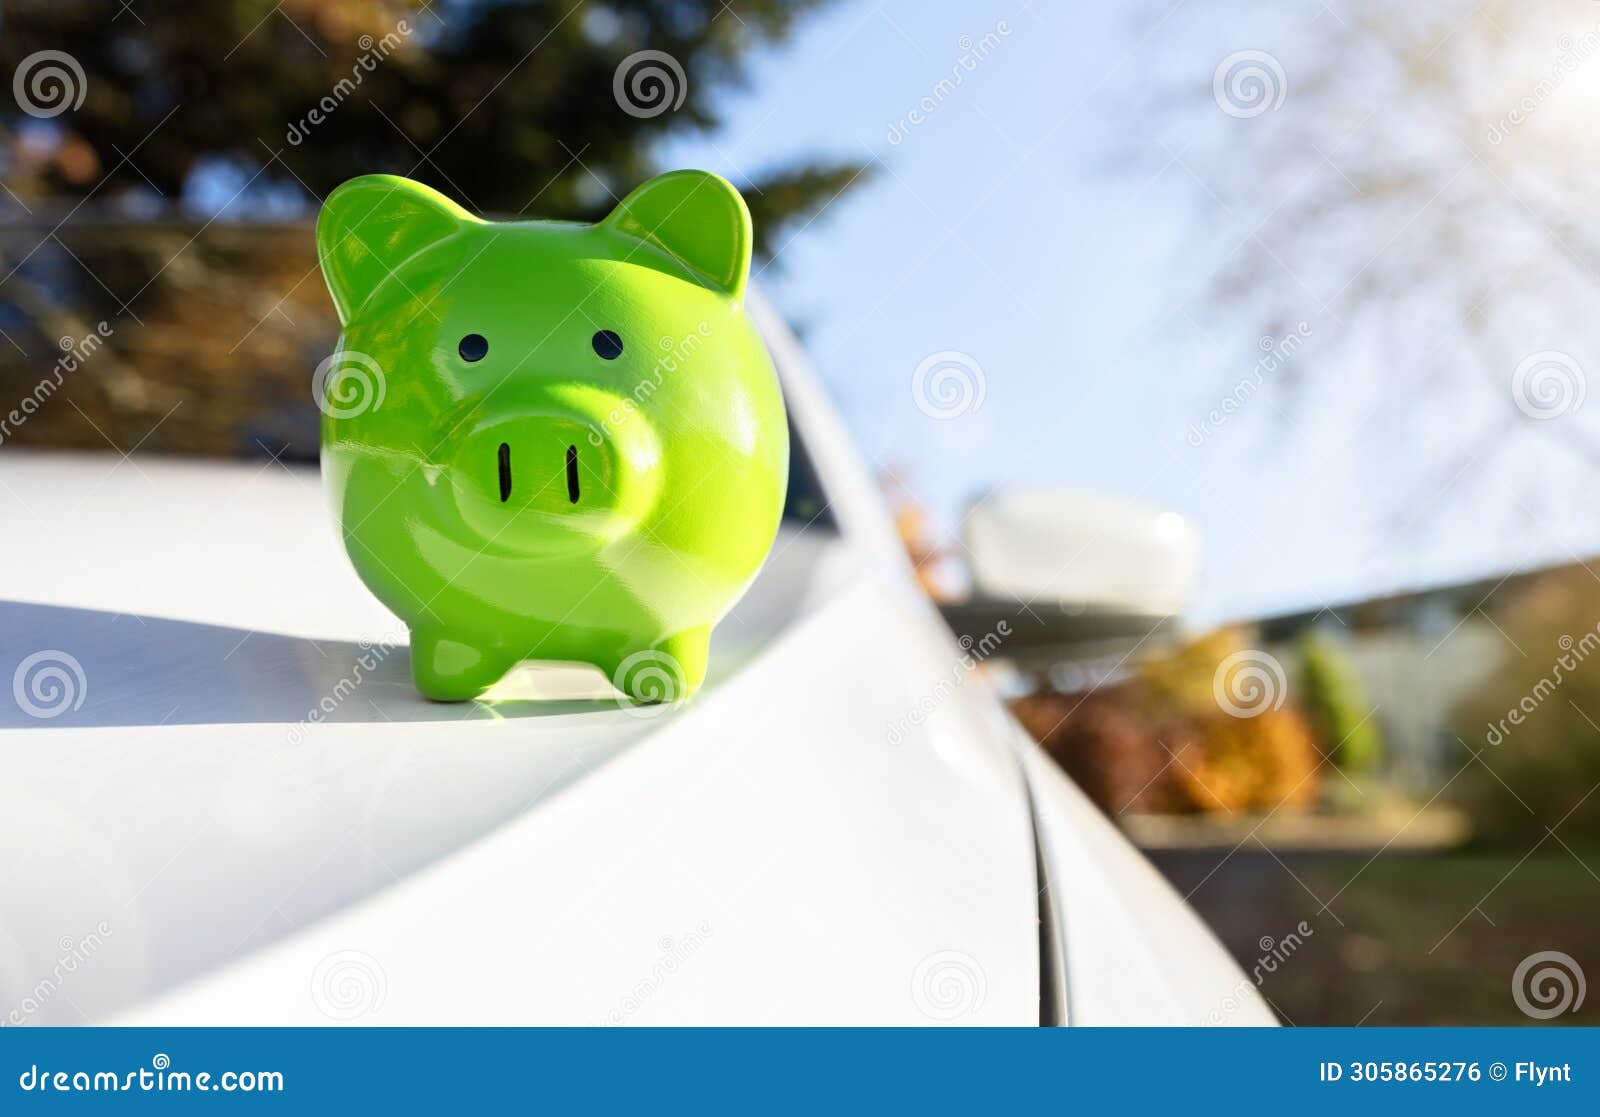 green piggy bank money box on top of car hood, new vehicle purchase, insurance or driving and motoring cost